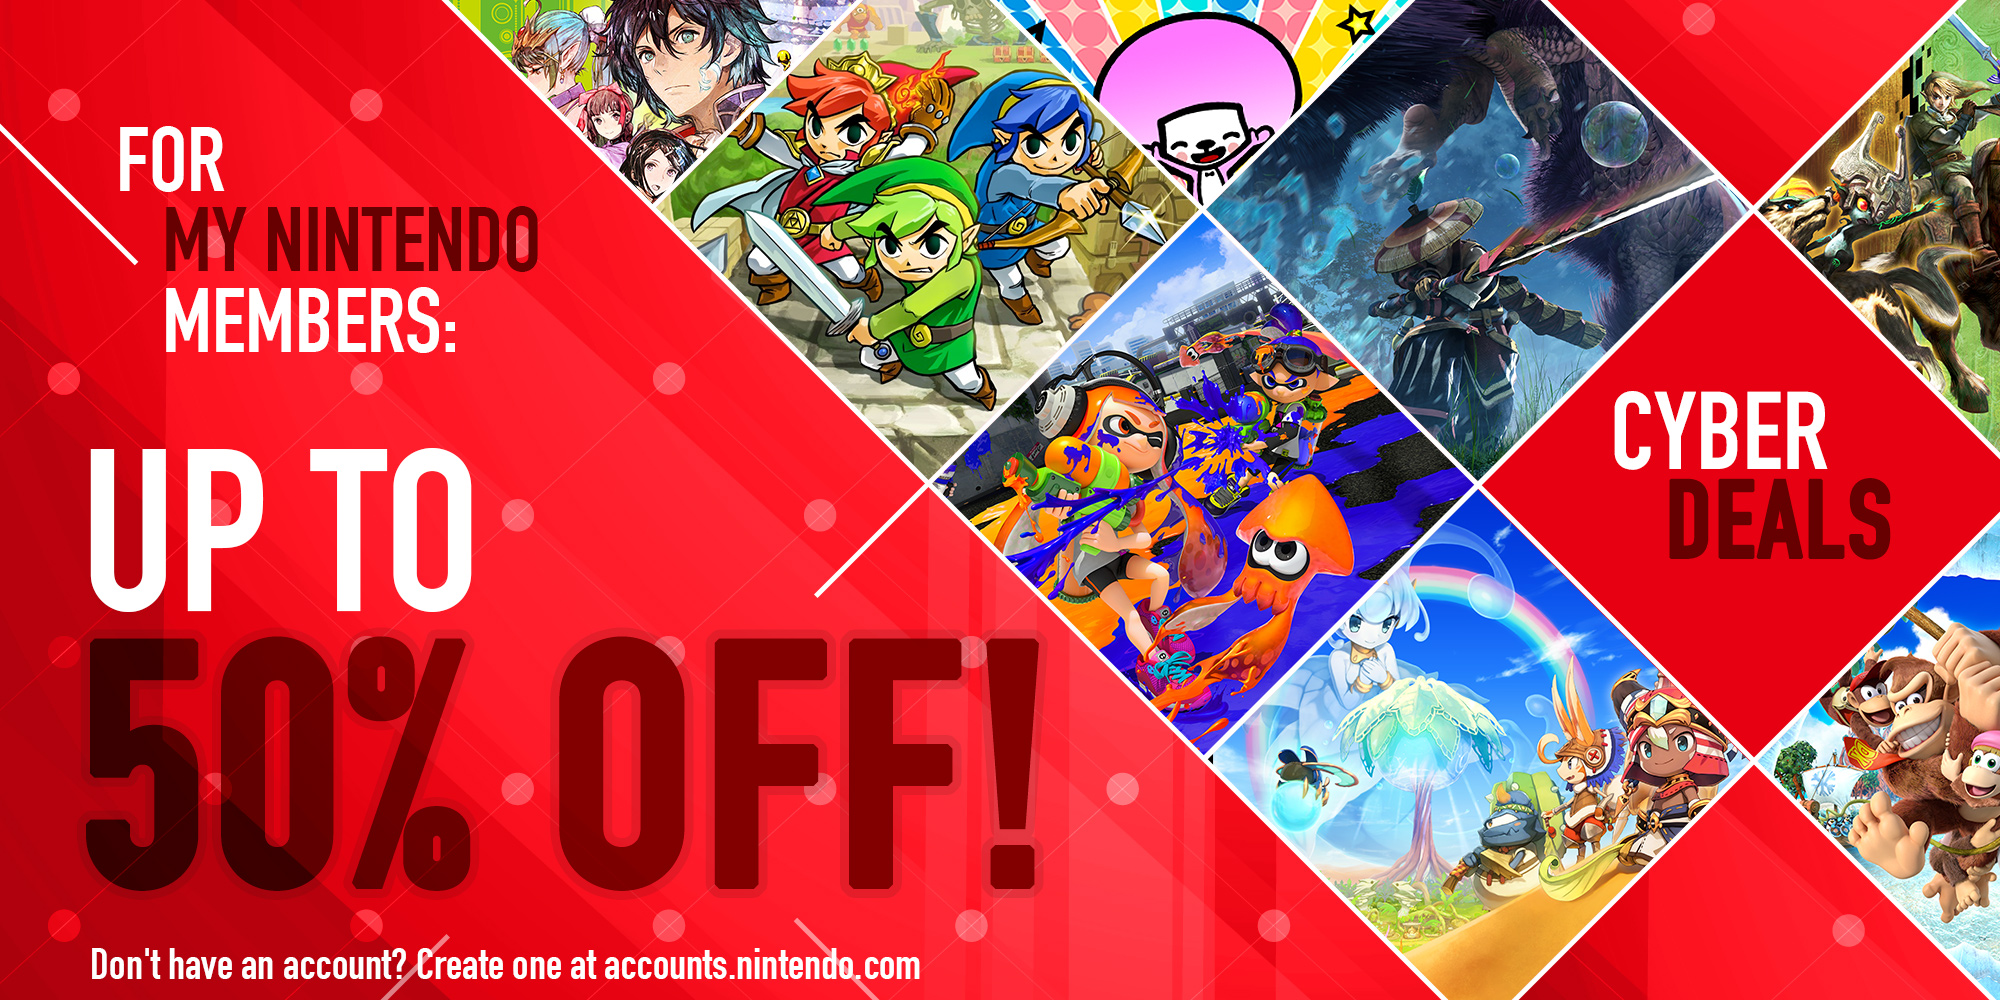 UK: Discounts Coming To The eShop For Black Friday - My Nintendo News